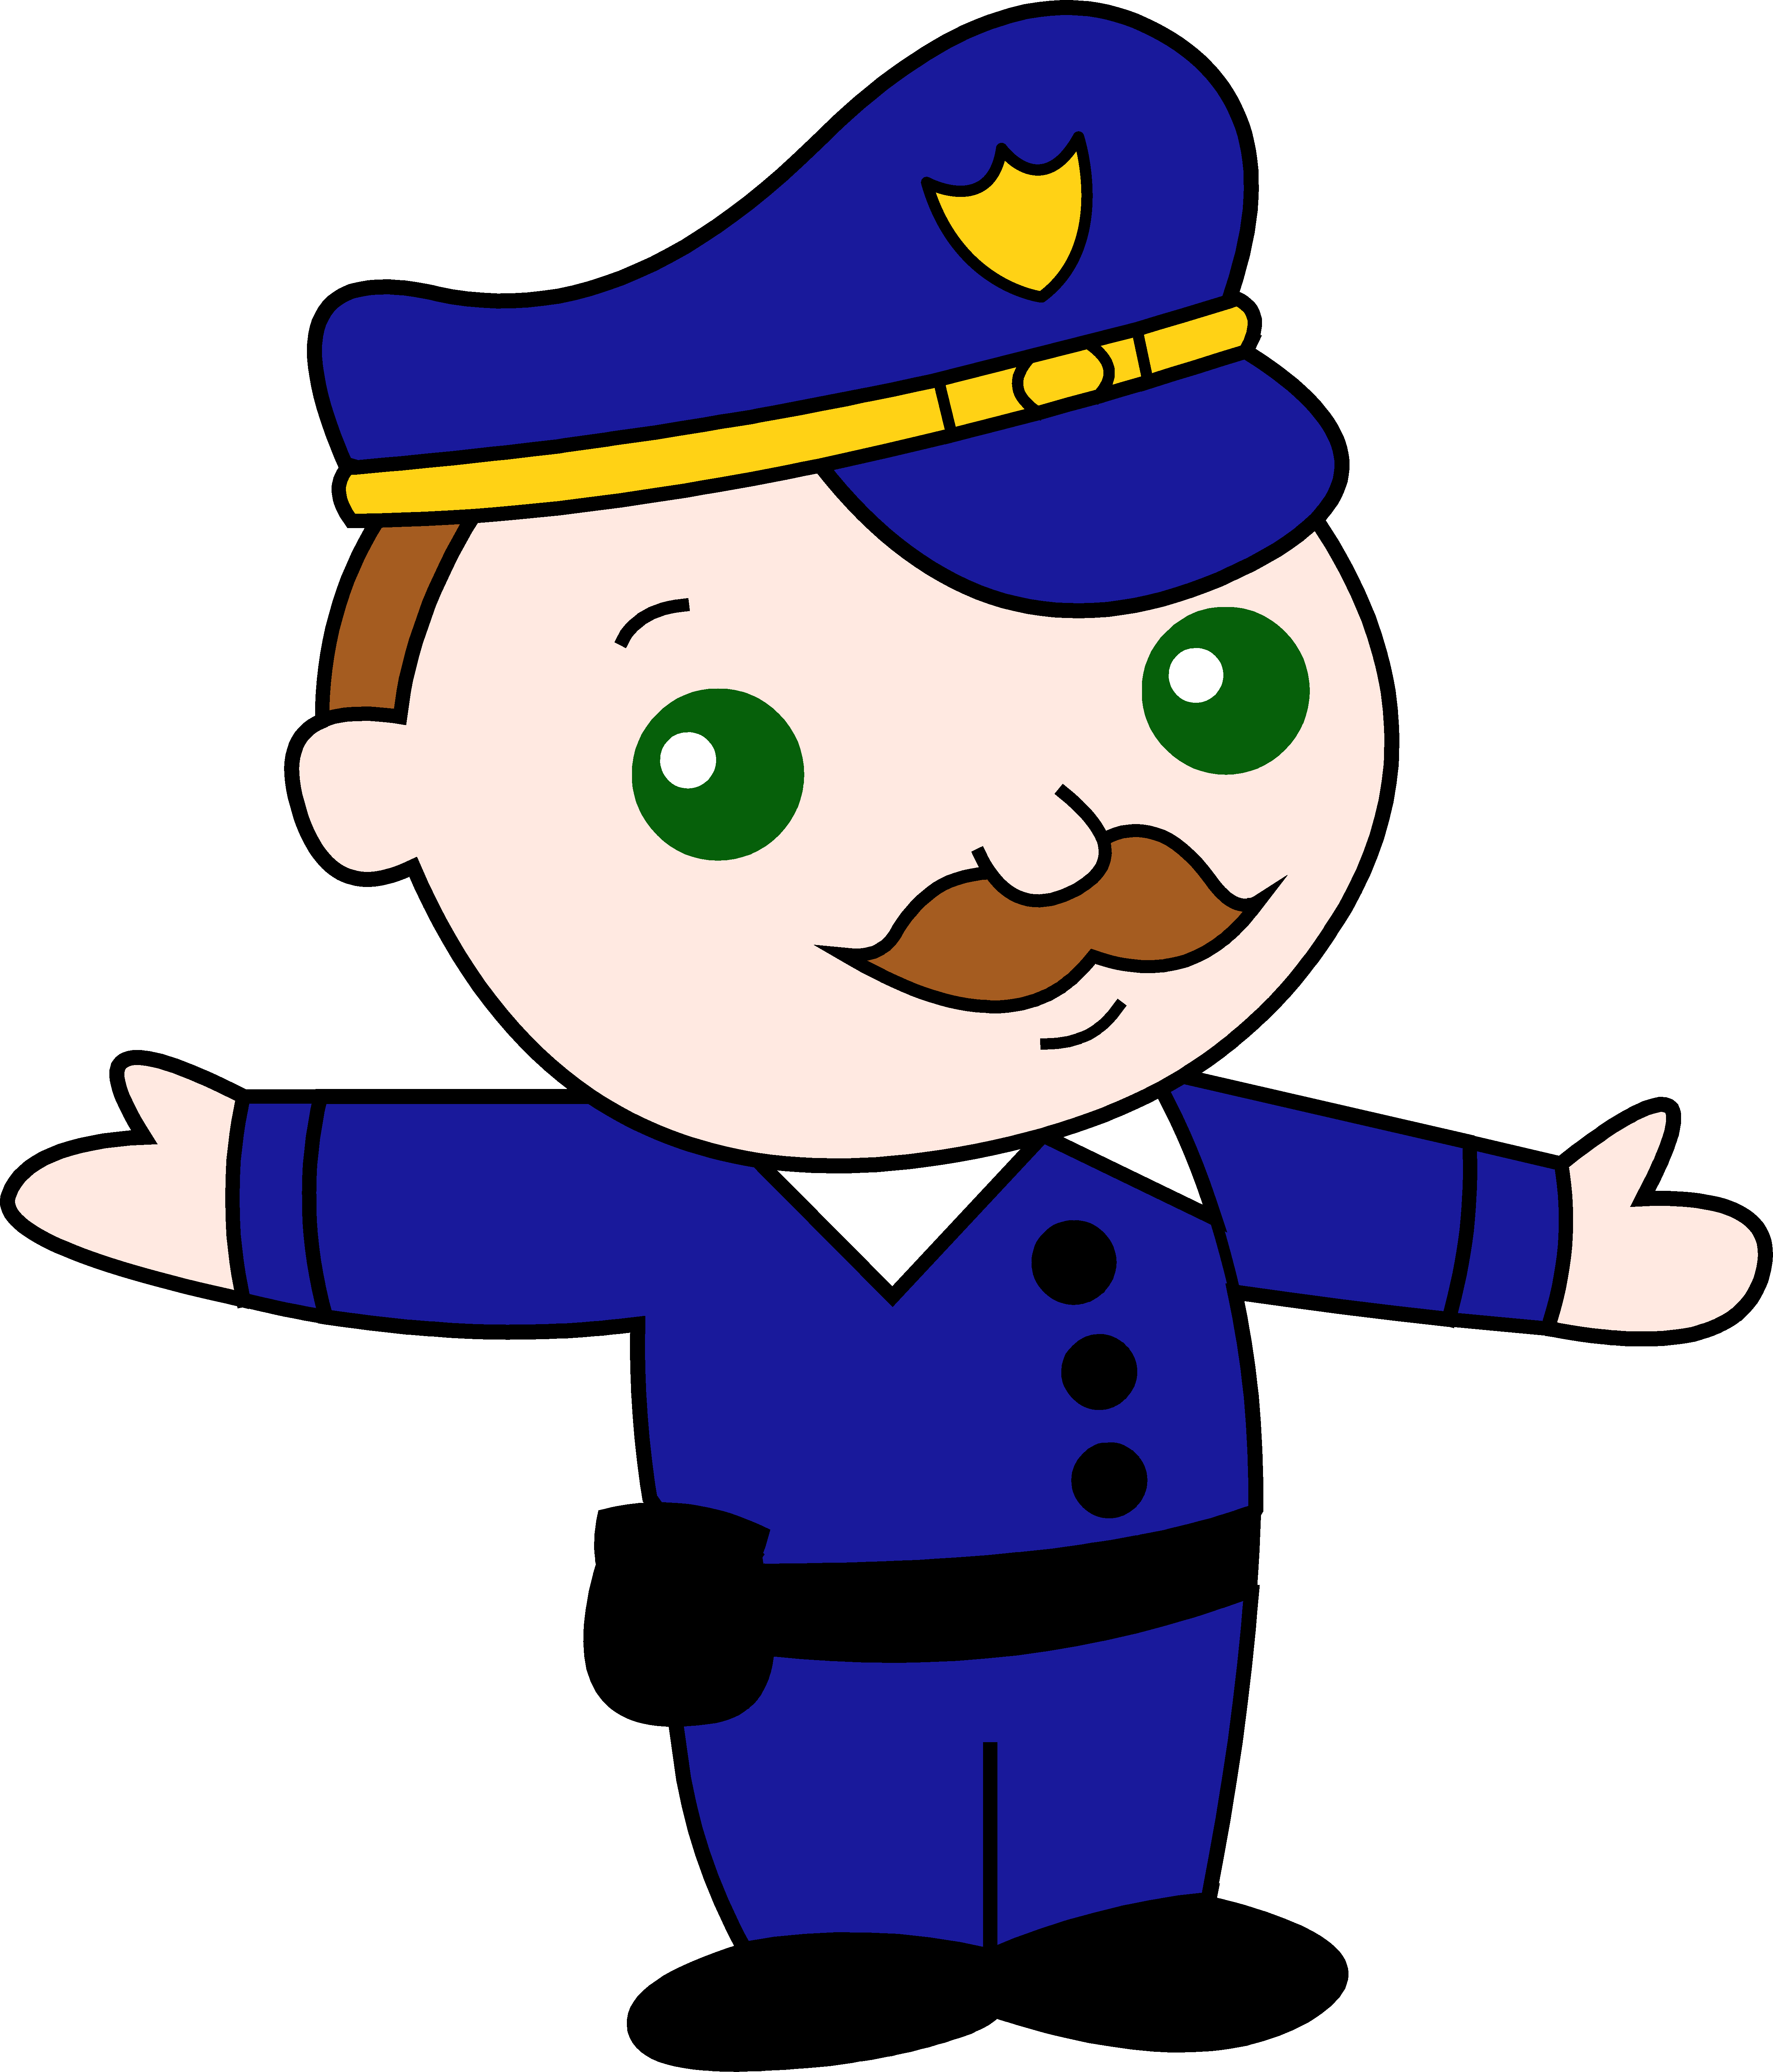 Police Clip Art To Print Free | Clipart Panda - Free Clipart Images